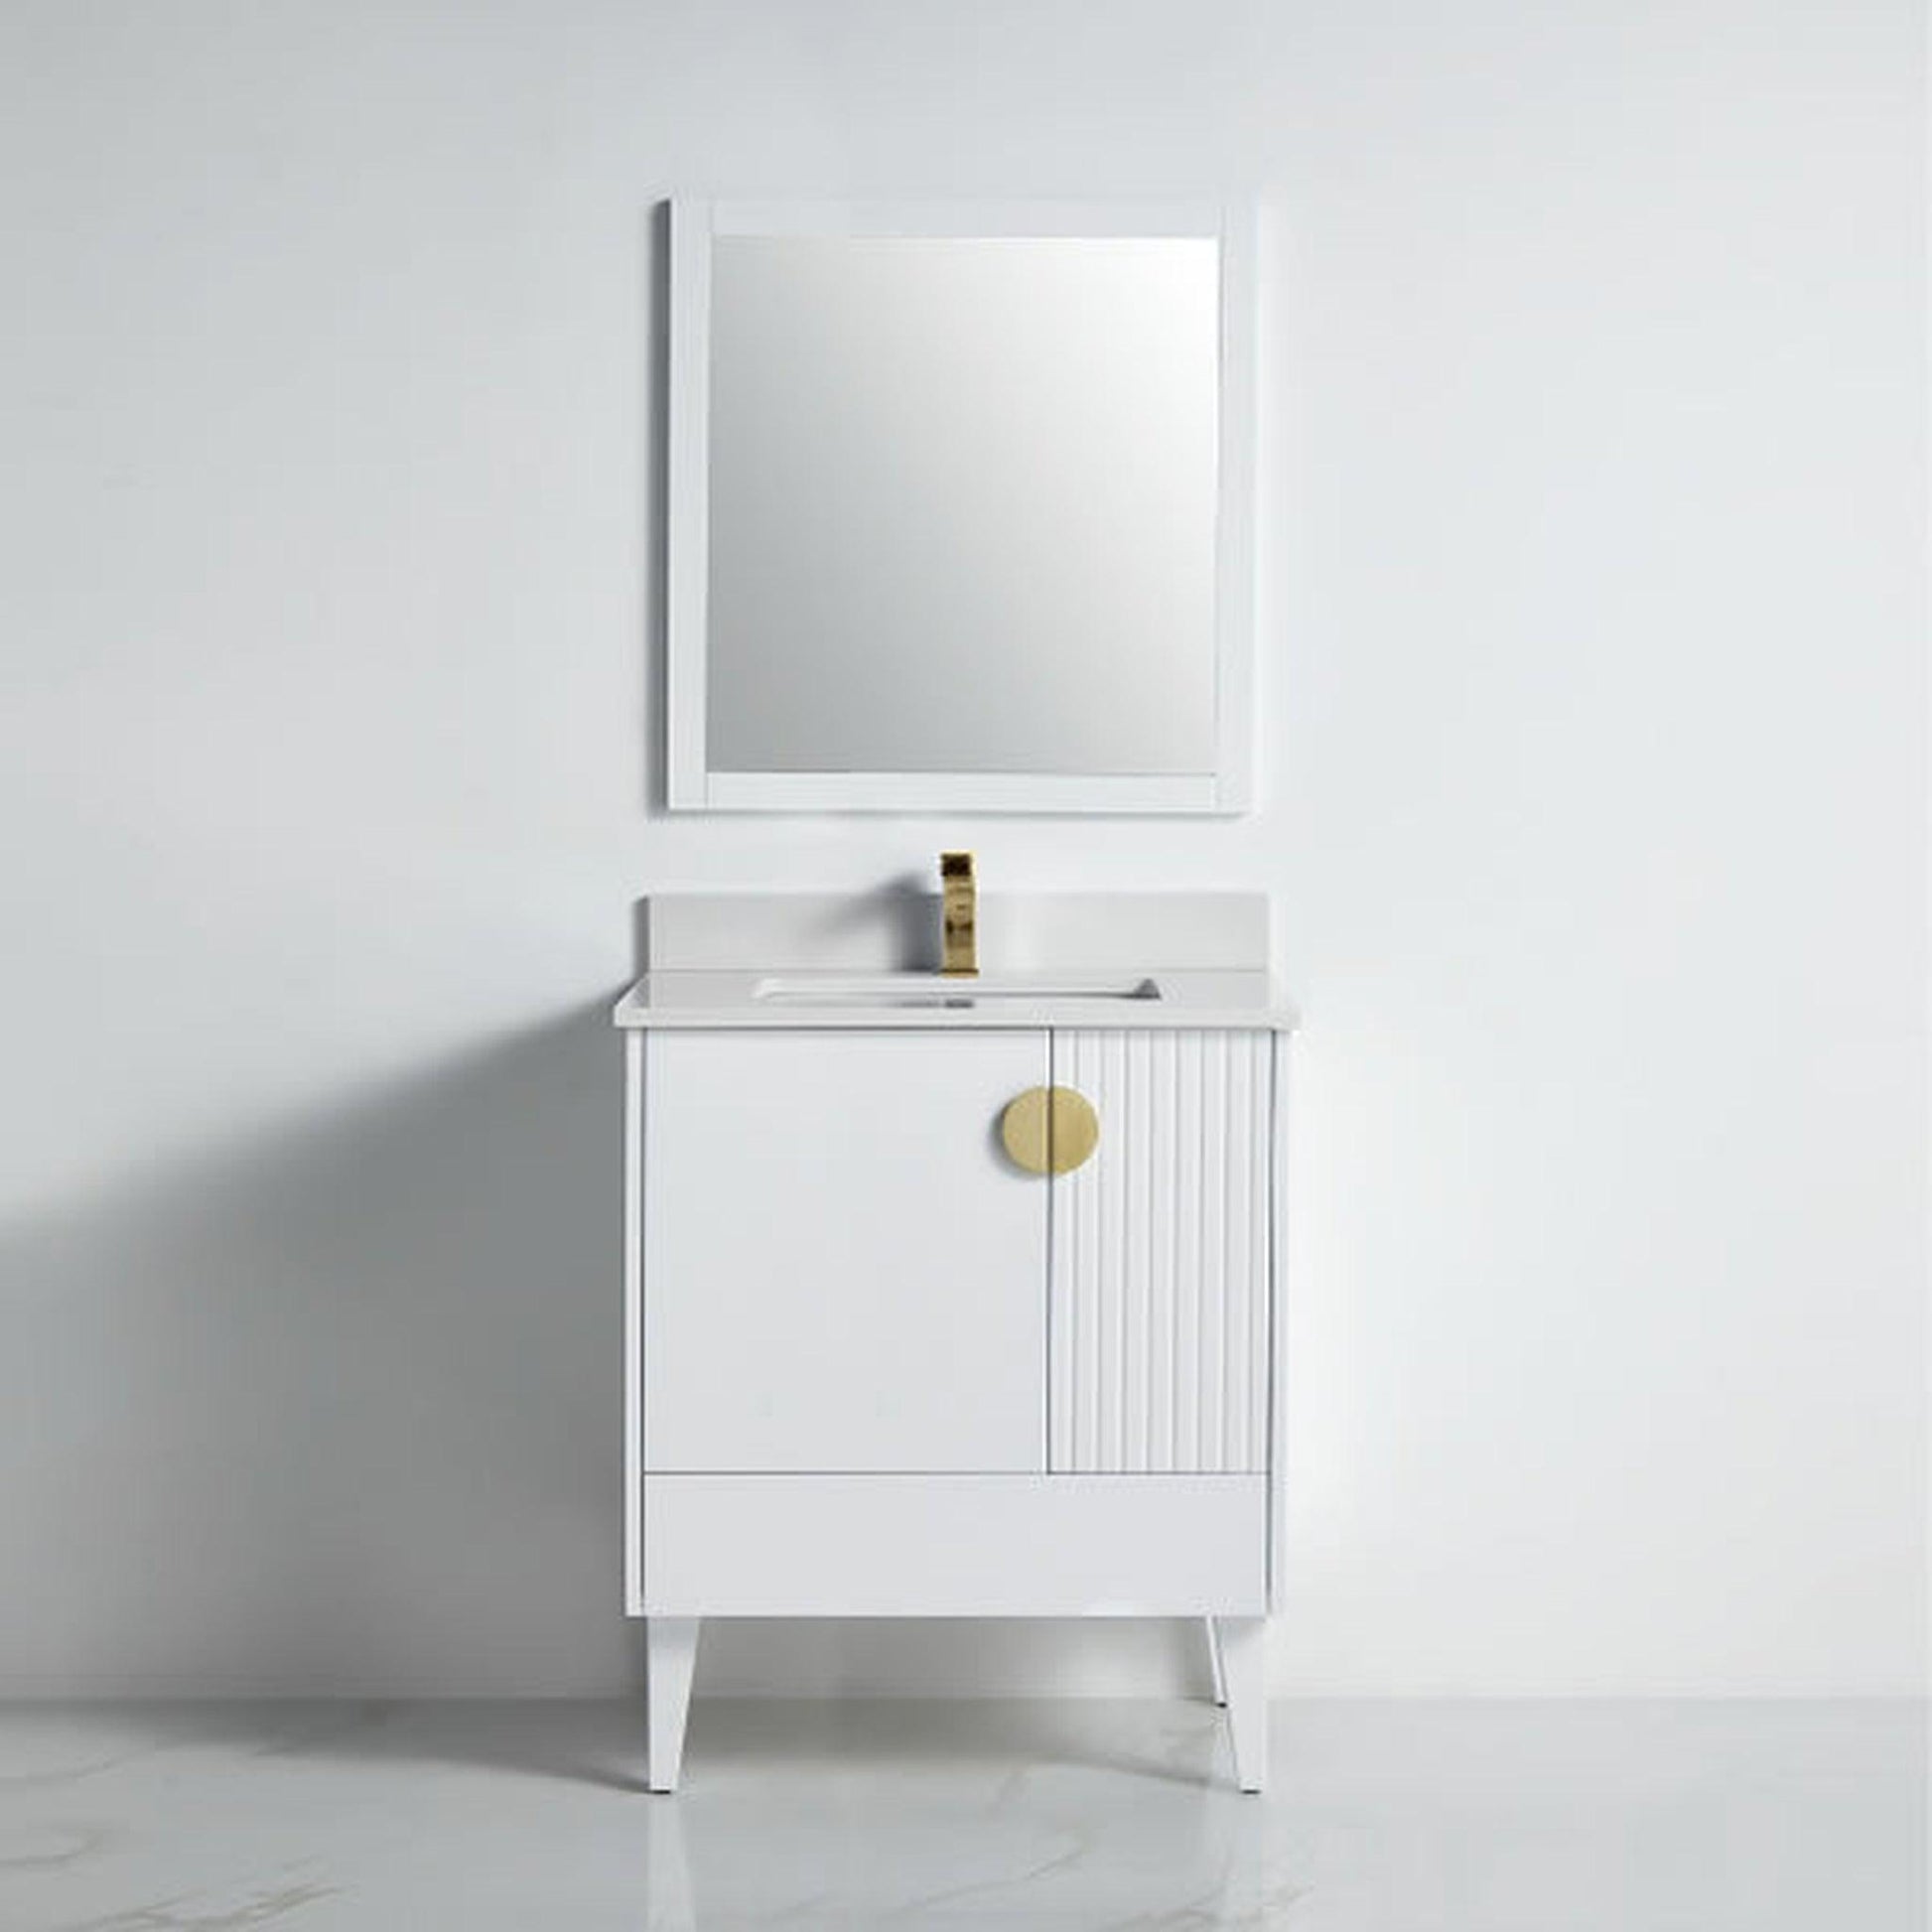 BNK BCB1430WH Athens Matt White Vanity Only Two Glass Door One Drawer Soft Close